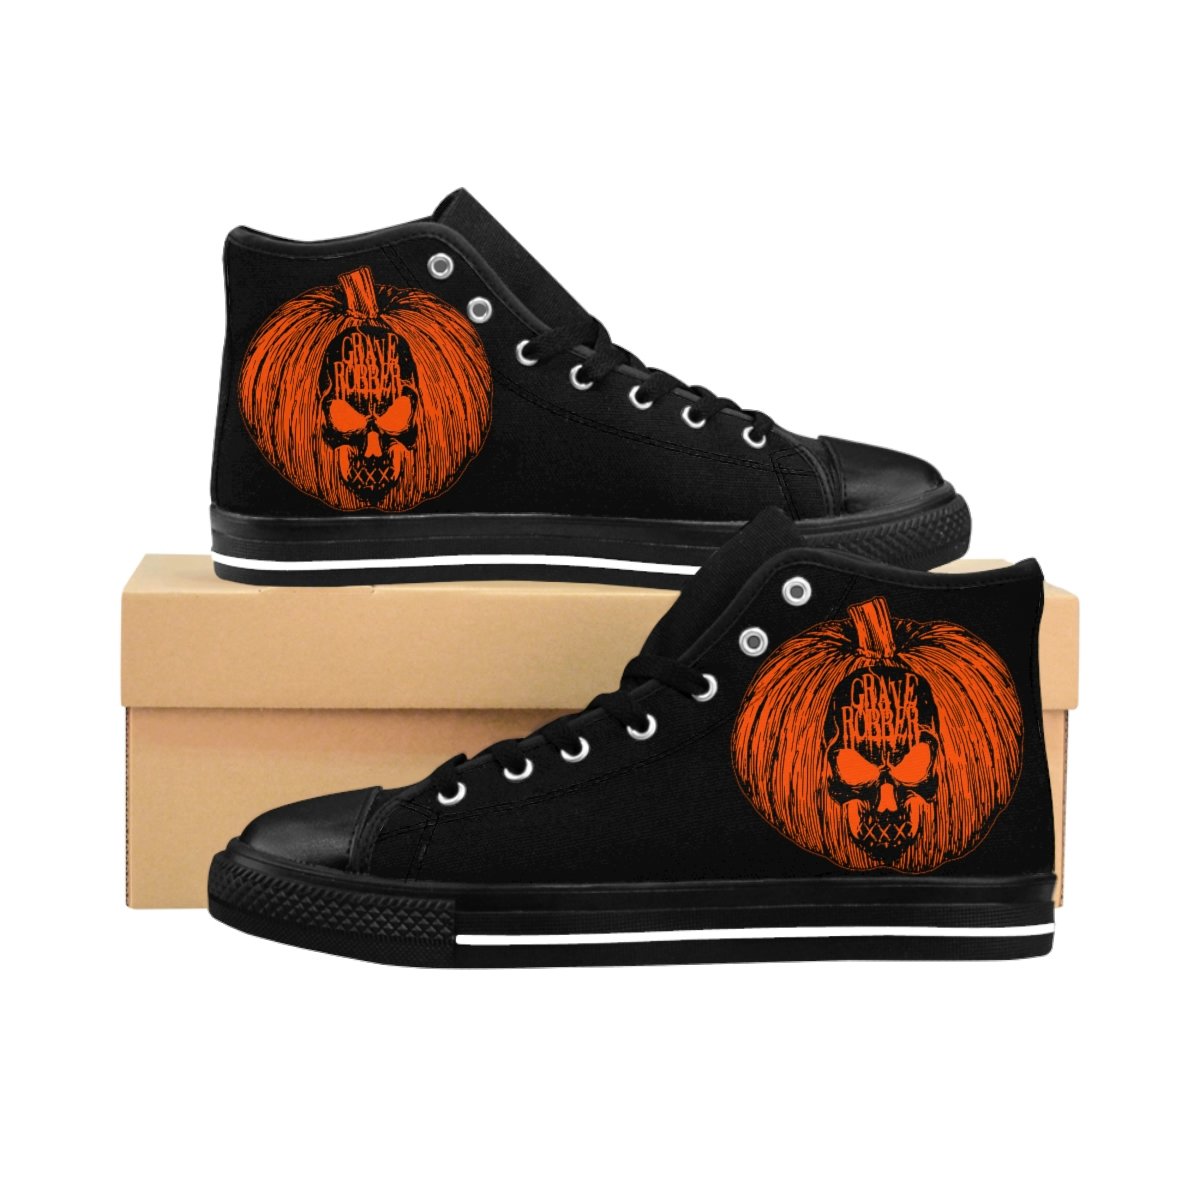 Grave Robber Pumpkin Limited Edition Men’s High-top Sneakers